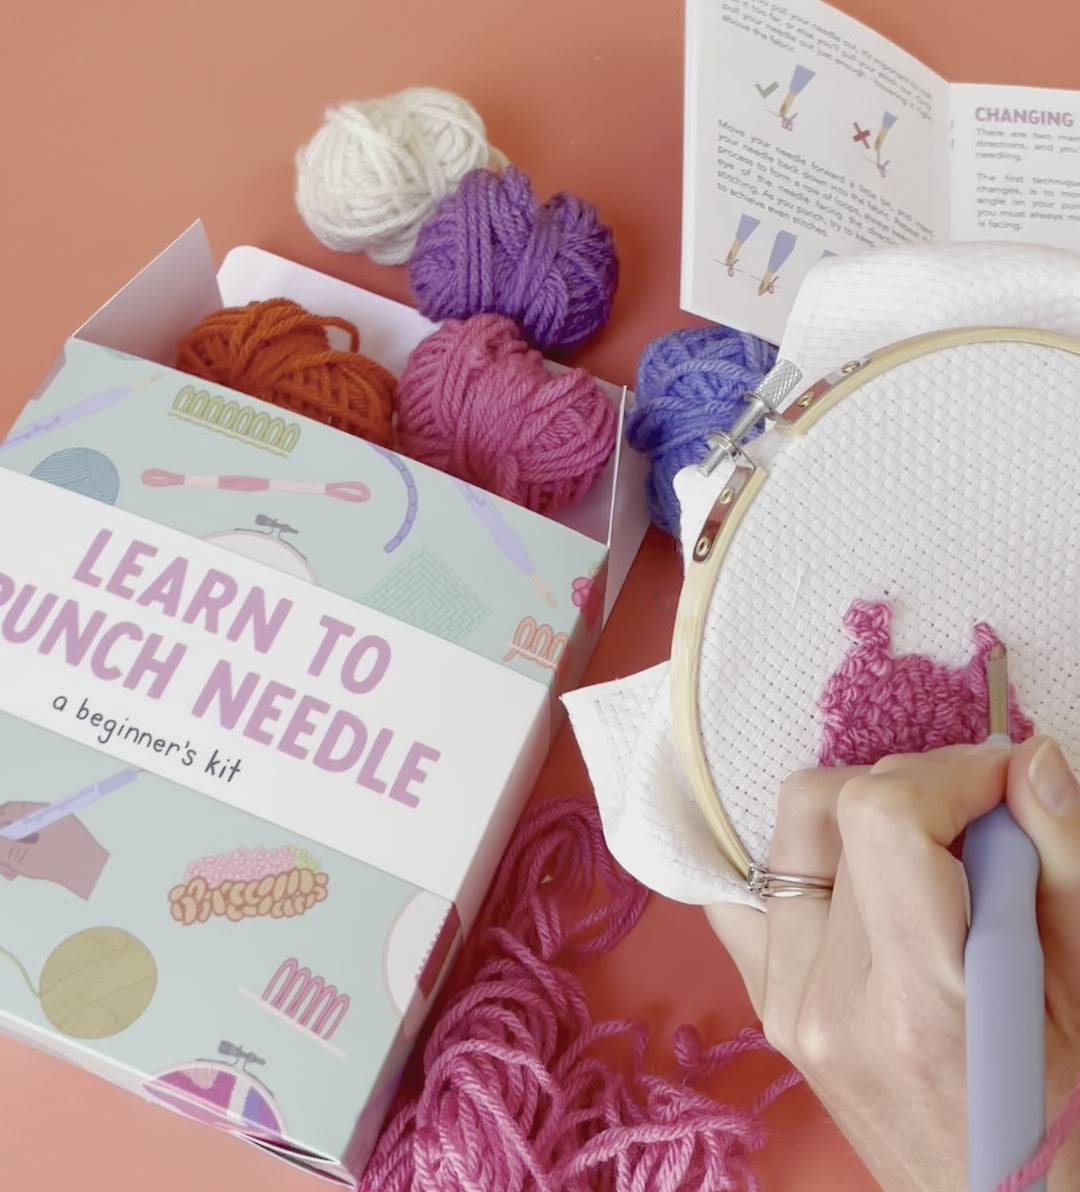 punch embroidery kit